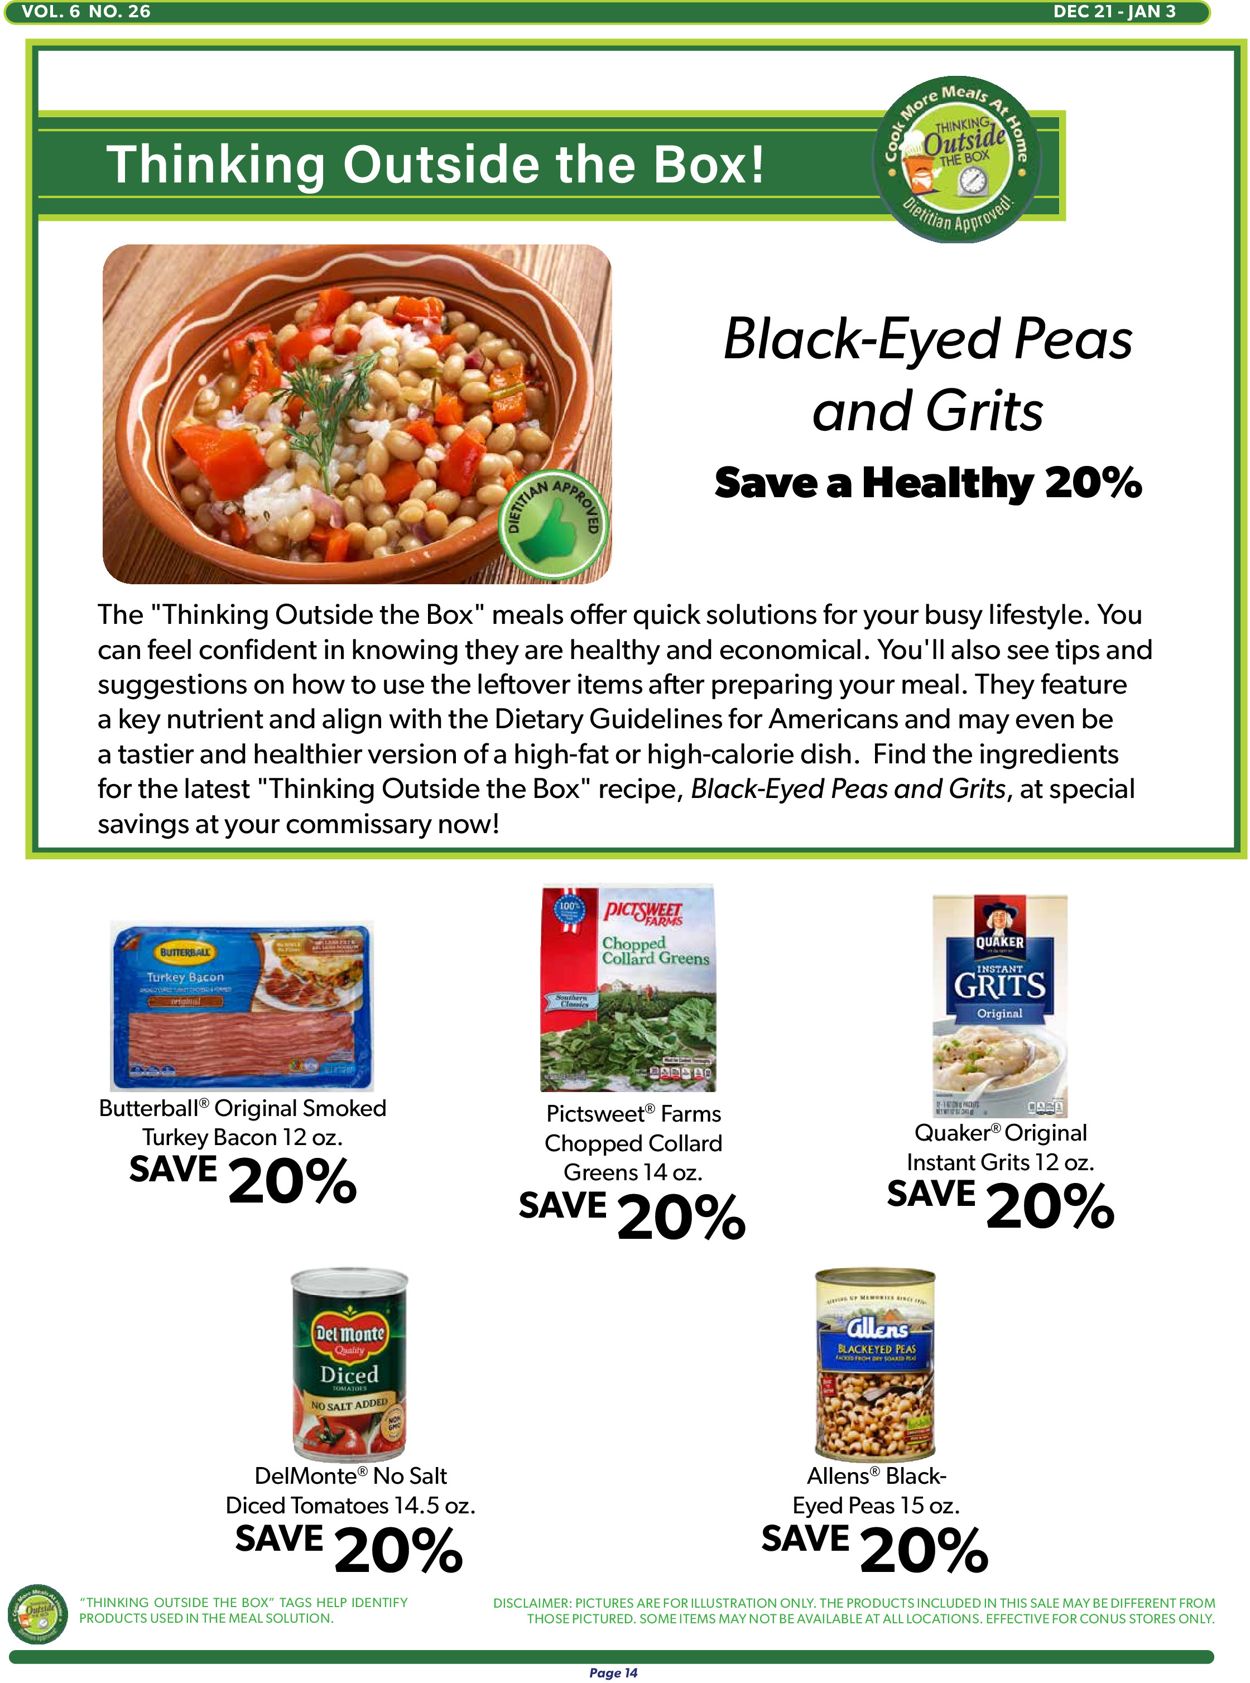 Catalogue Commissary Christmas Ad 2020 from 12/21/2020